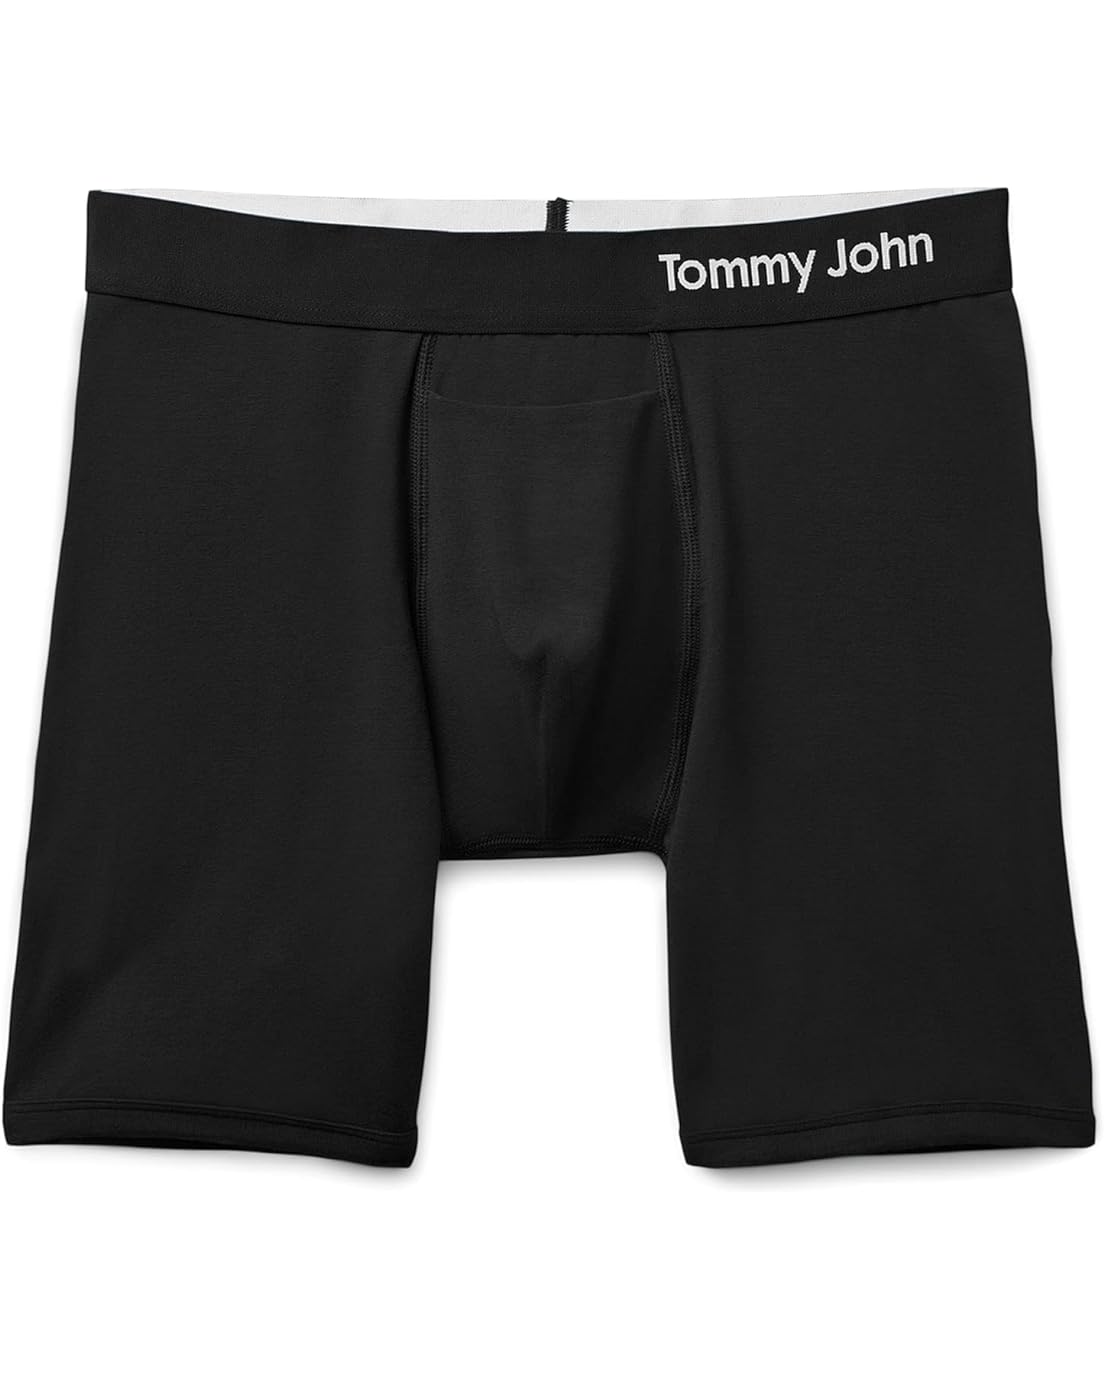  Tommy John Cool Cotton Mid-Length Boxer Brief 6